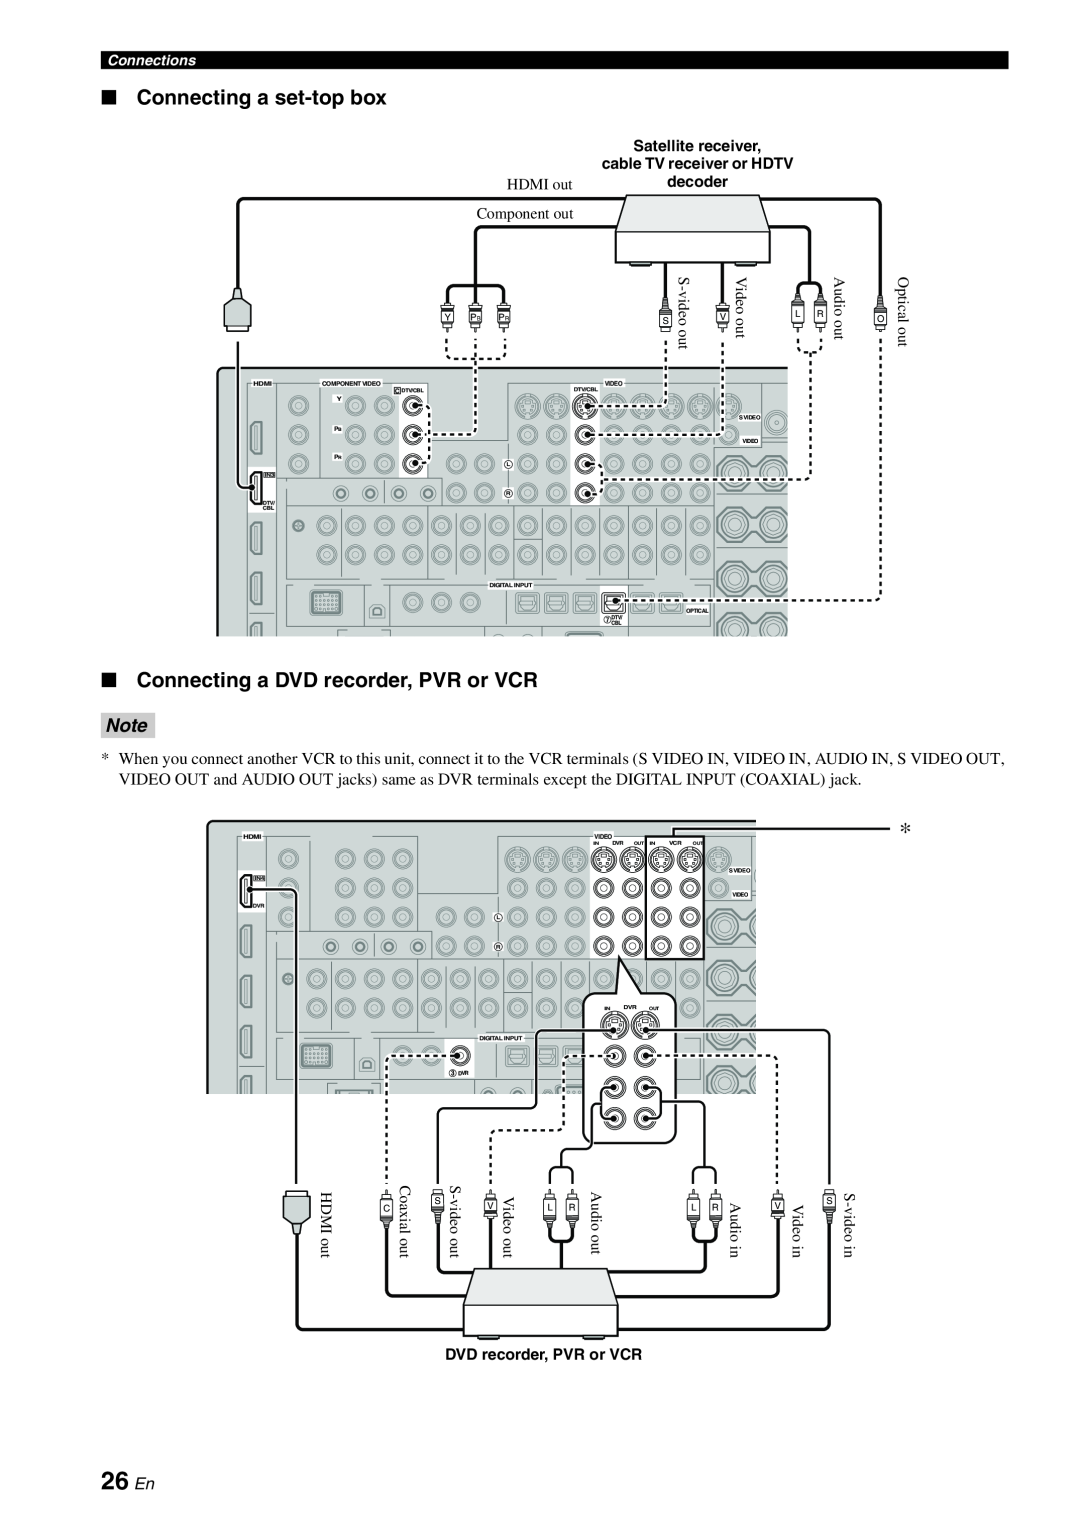 Yamaha RX-V3800 owner manual 26 En, Connecting a set-top box, Connecting a DVD recorder, PVR or VCR 